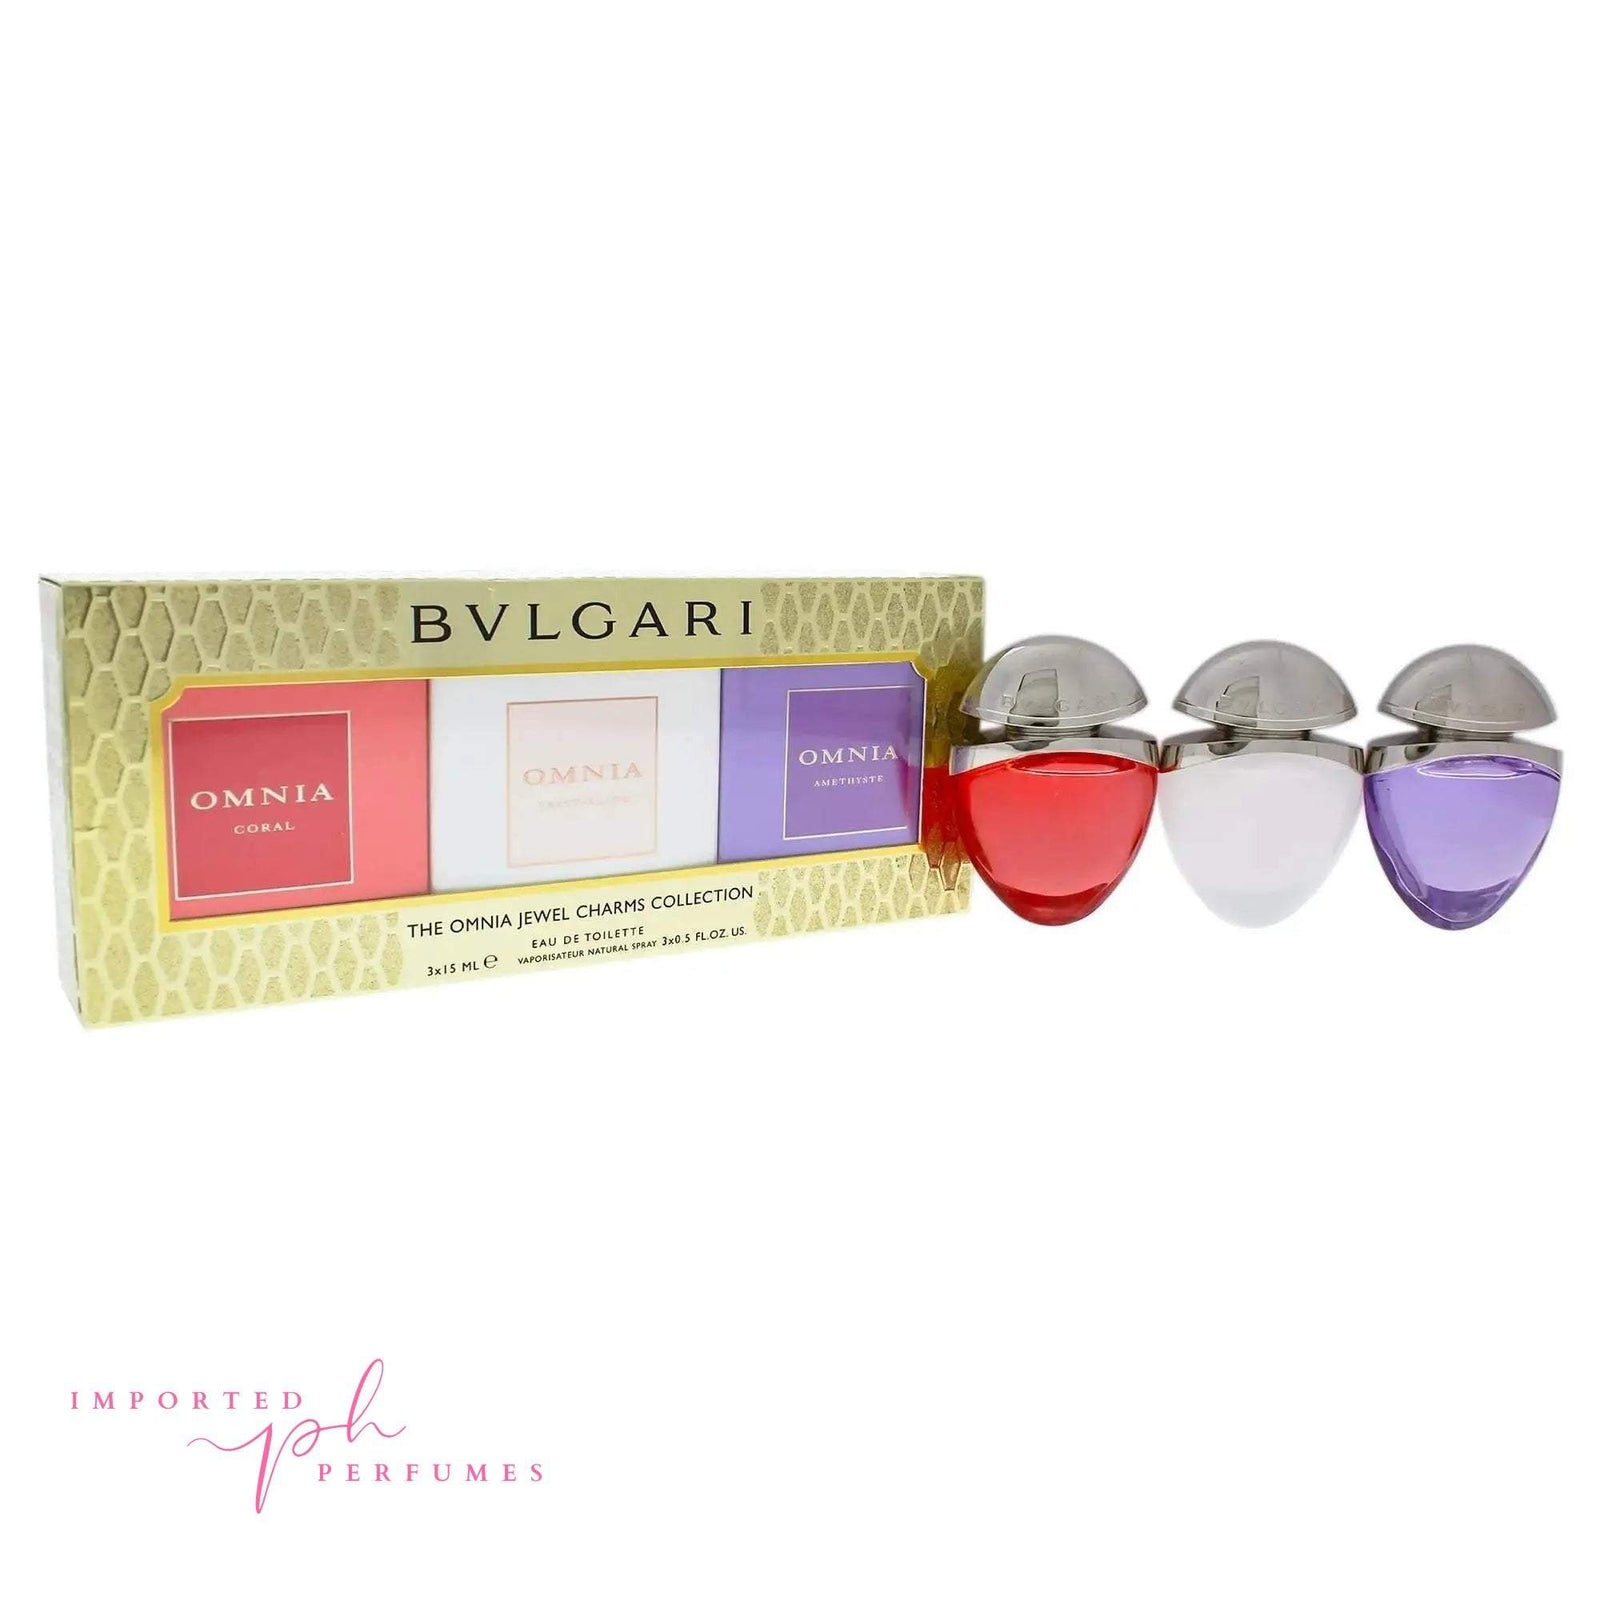 [TESTER] Bvlgari Omnia Jewels Charms Fragrance Gift Set EDT-Imported Perfumes Co-Bvlgari,Gift,gift sets,set,sets,test,TESTER